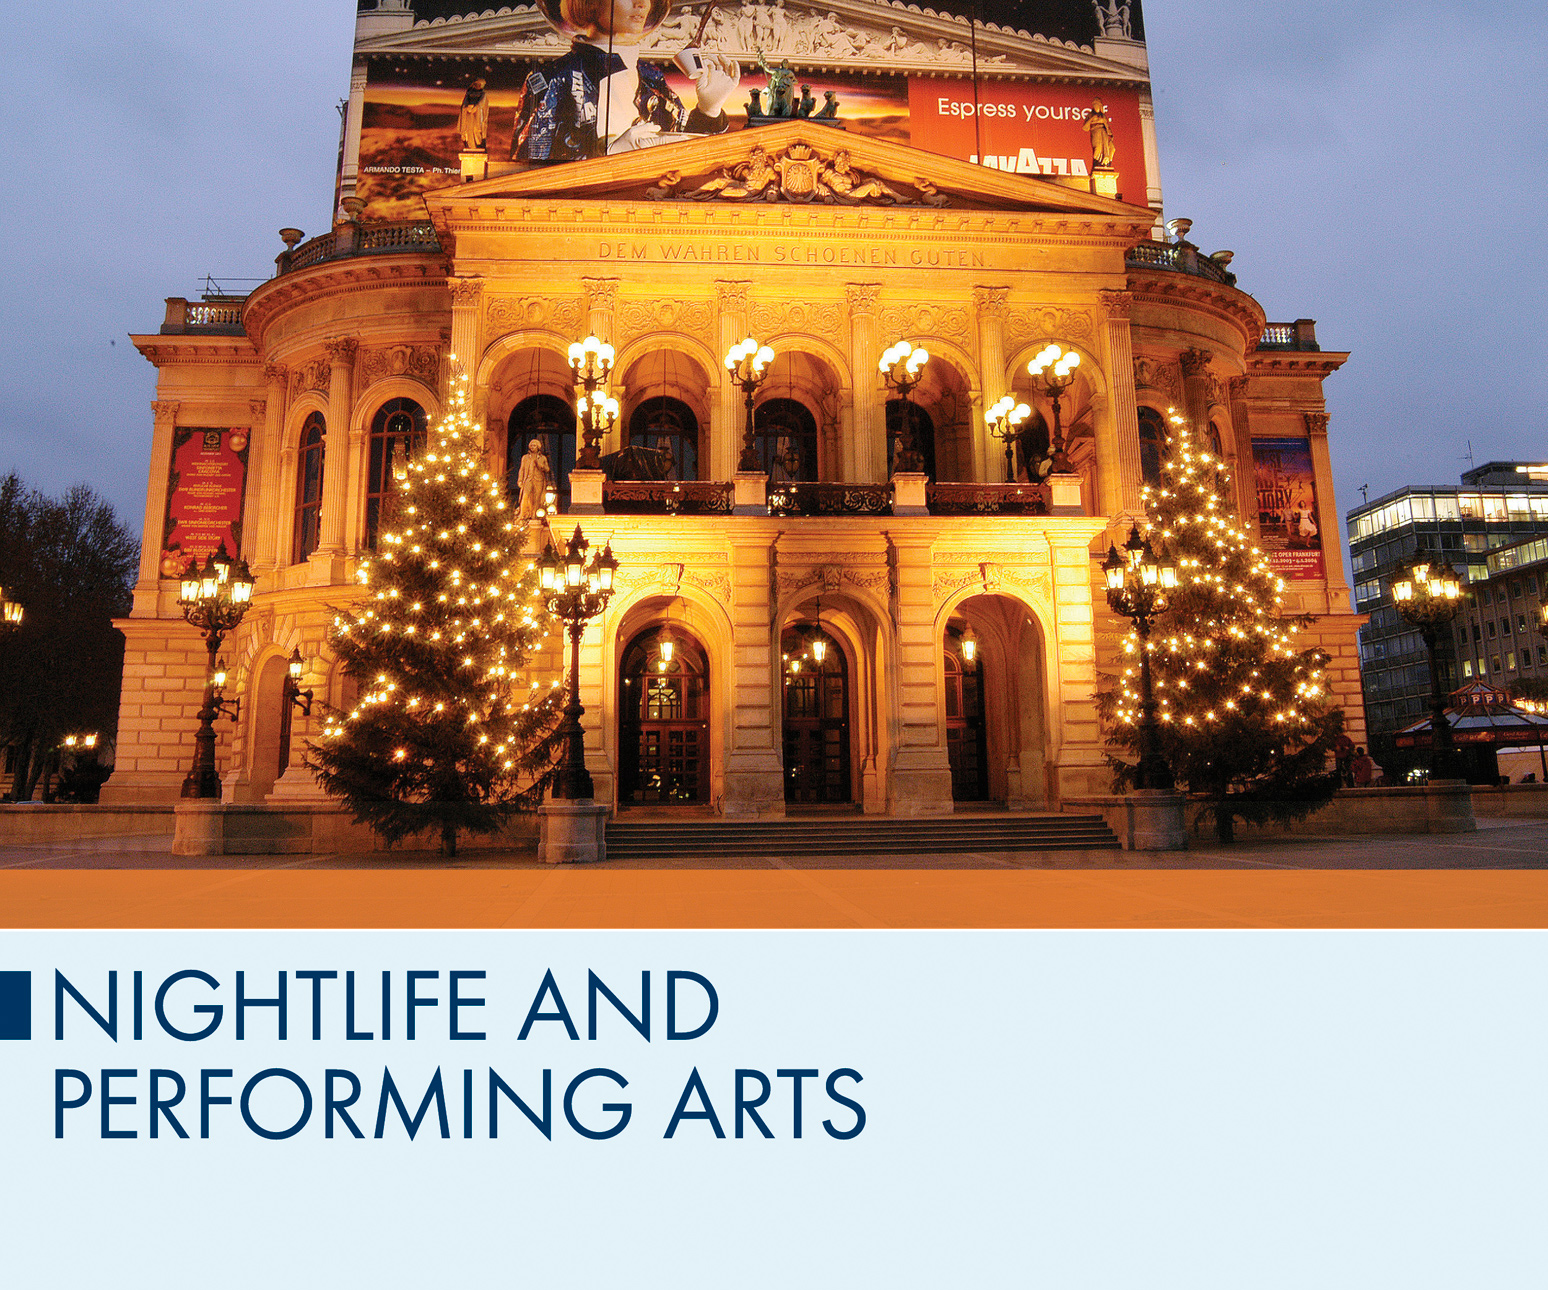 Nightlife and Performing Arts